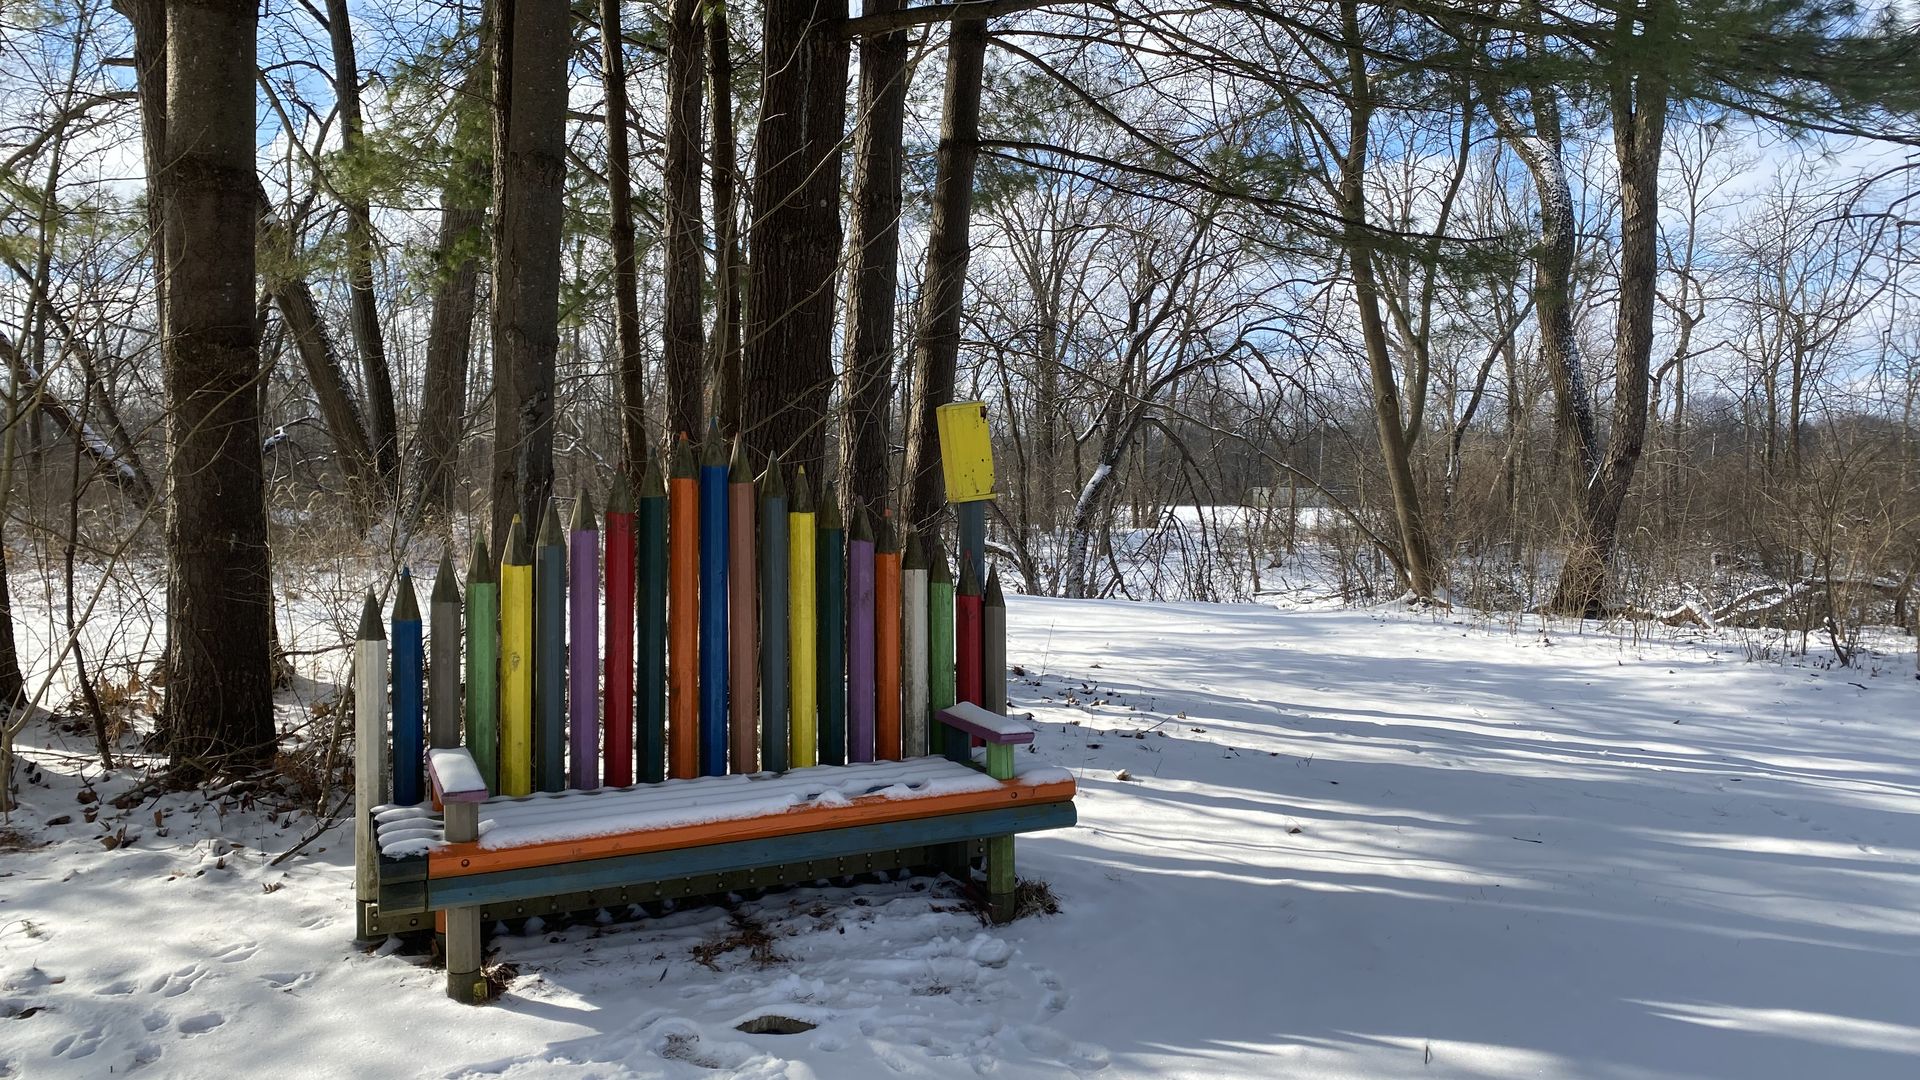 A park bench made out of colored pencil shaped wood in a snowy park near trees